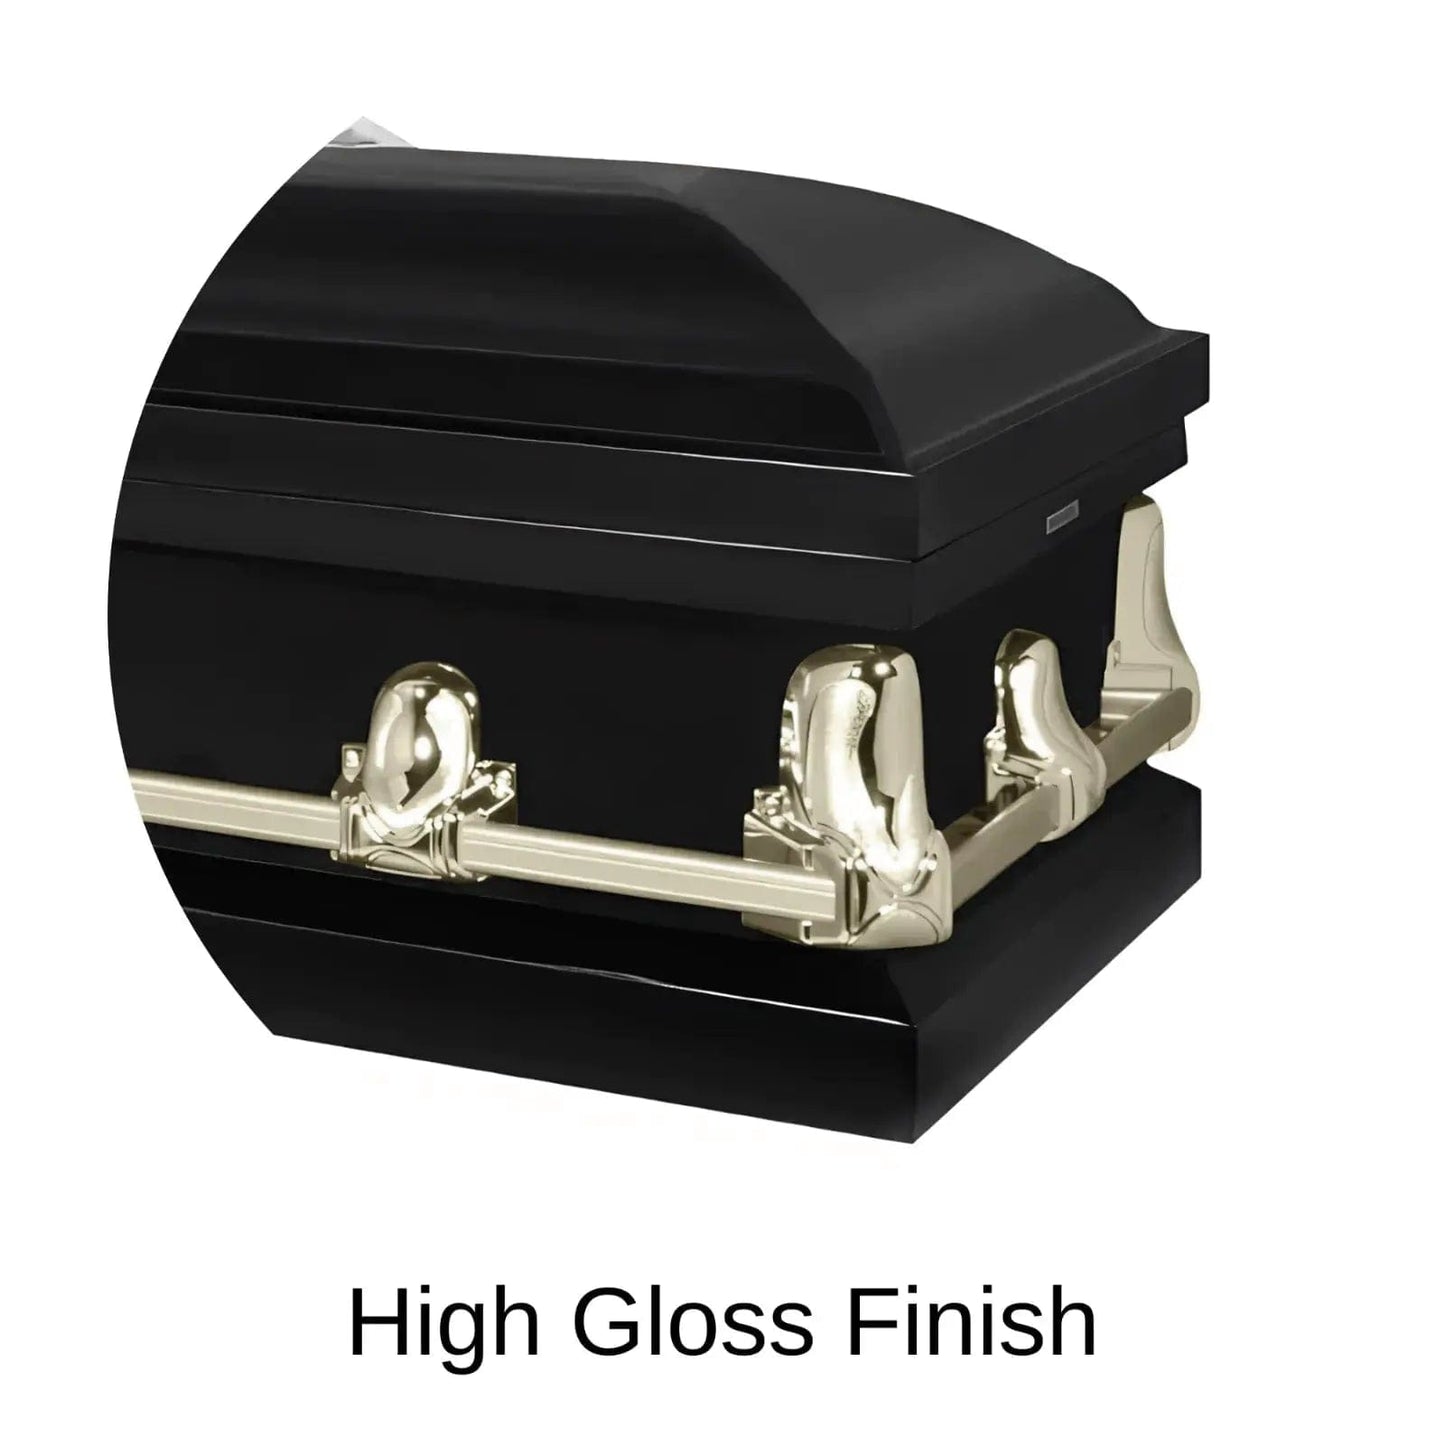 Orion Series | Black & Gold Steel Casket with White Interior